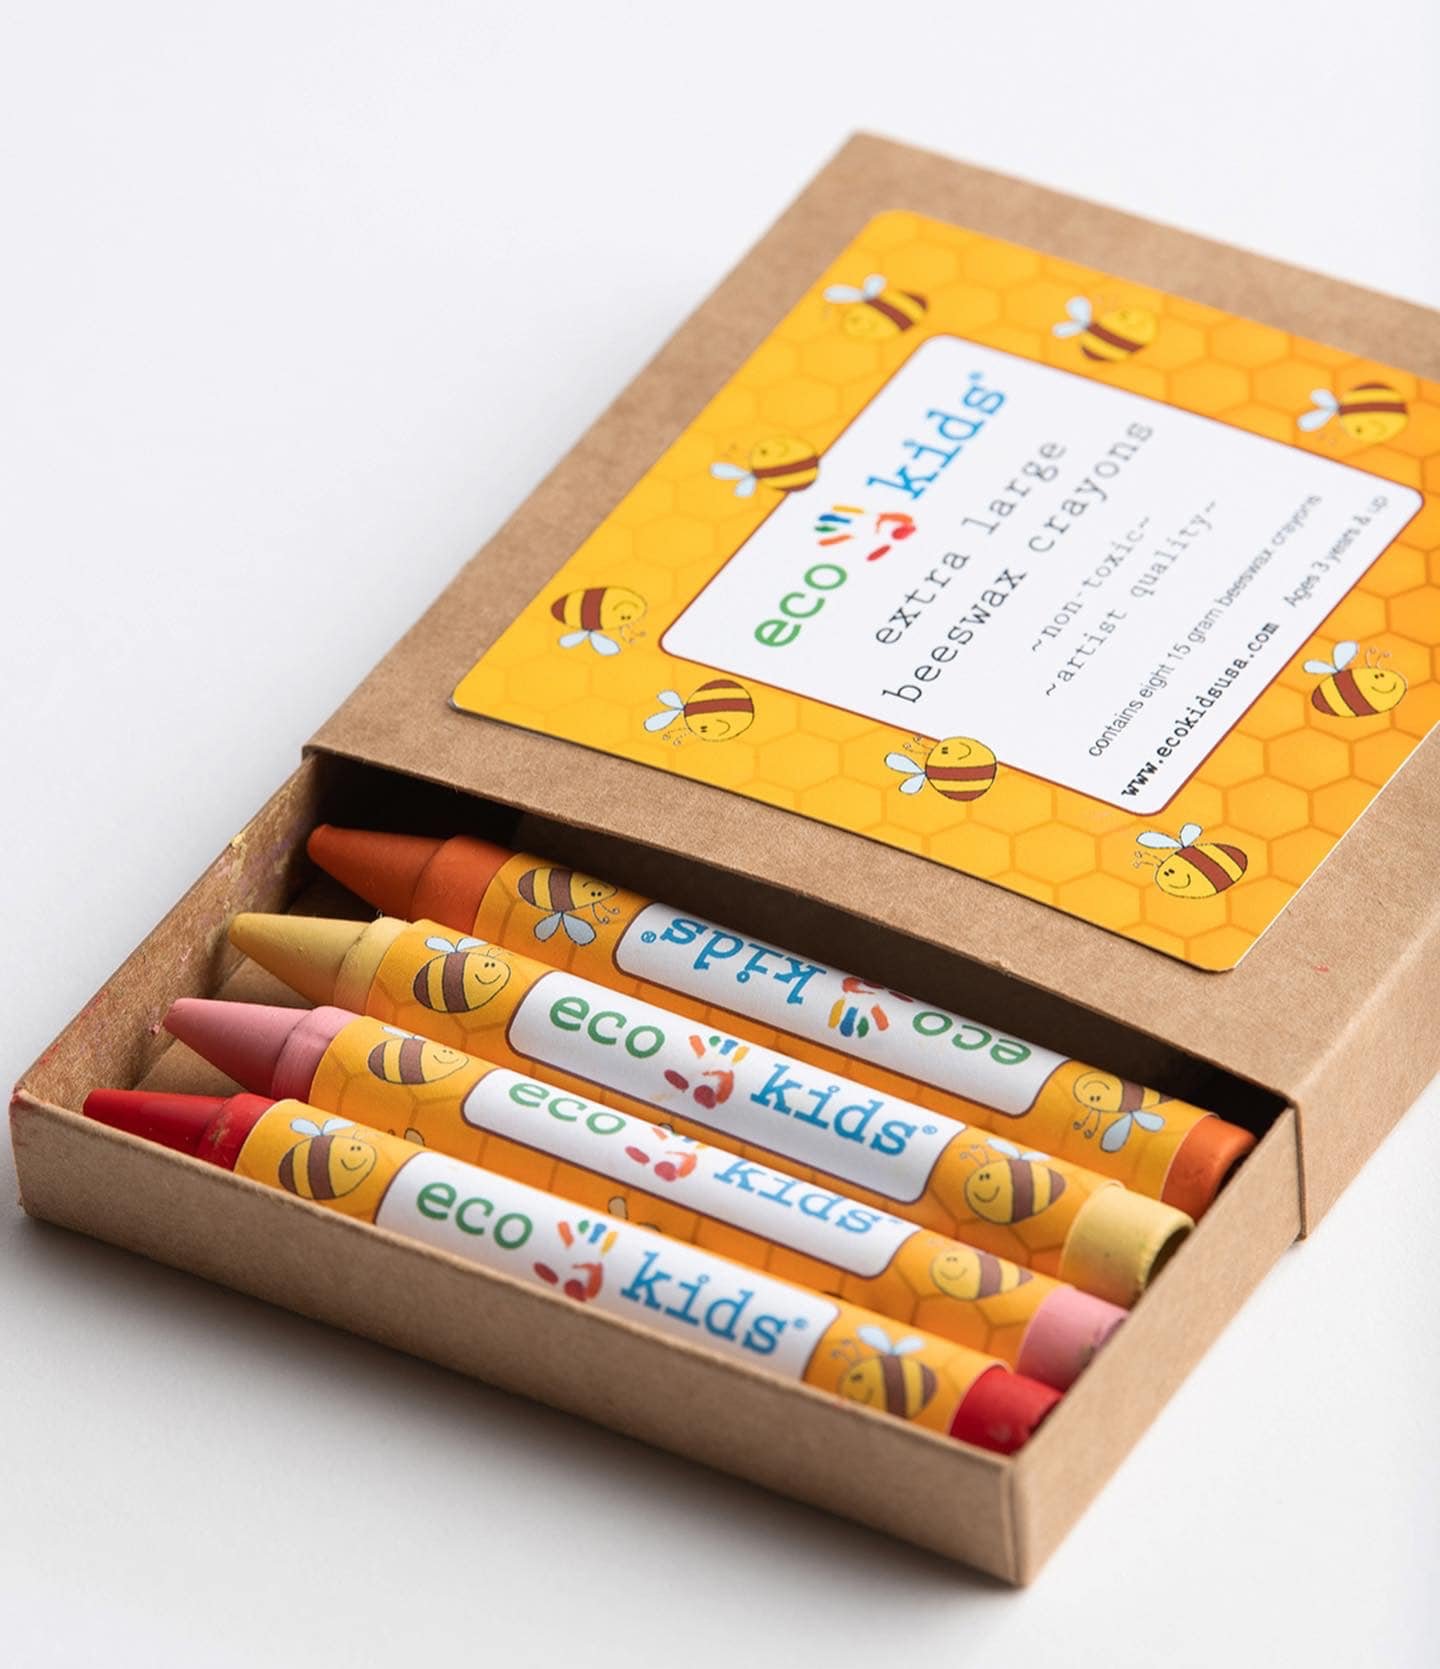 Honeysticks 100% Pure Beeswax Crayons 8 Pack Thins Natural Non Toxic Safe for in